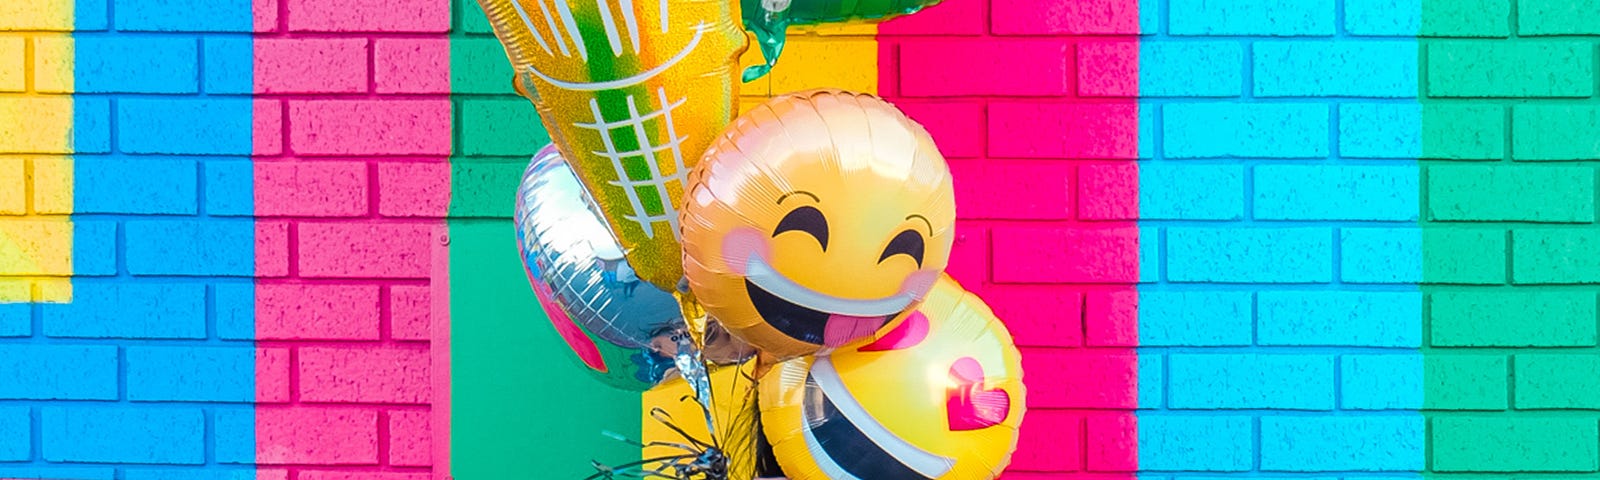 A woman standing in front of a colorful wall. Her face is covered by air baloons shaped like emoticons and an ice cream cone.